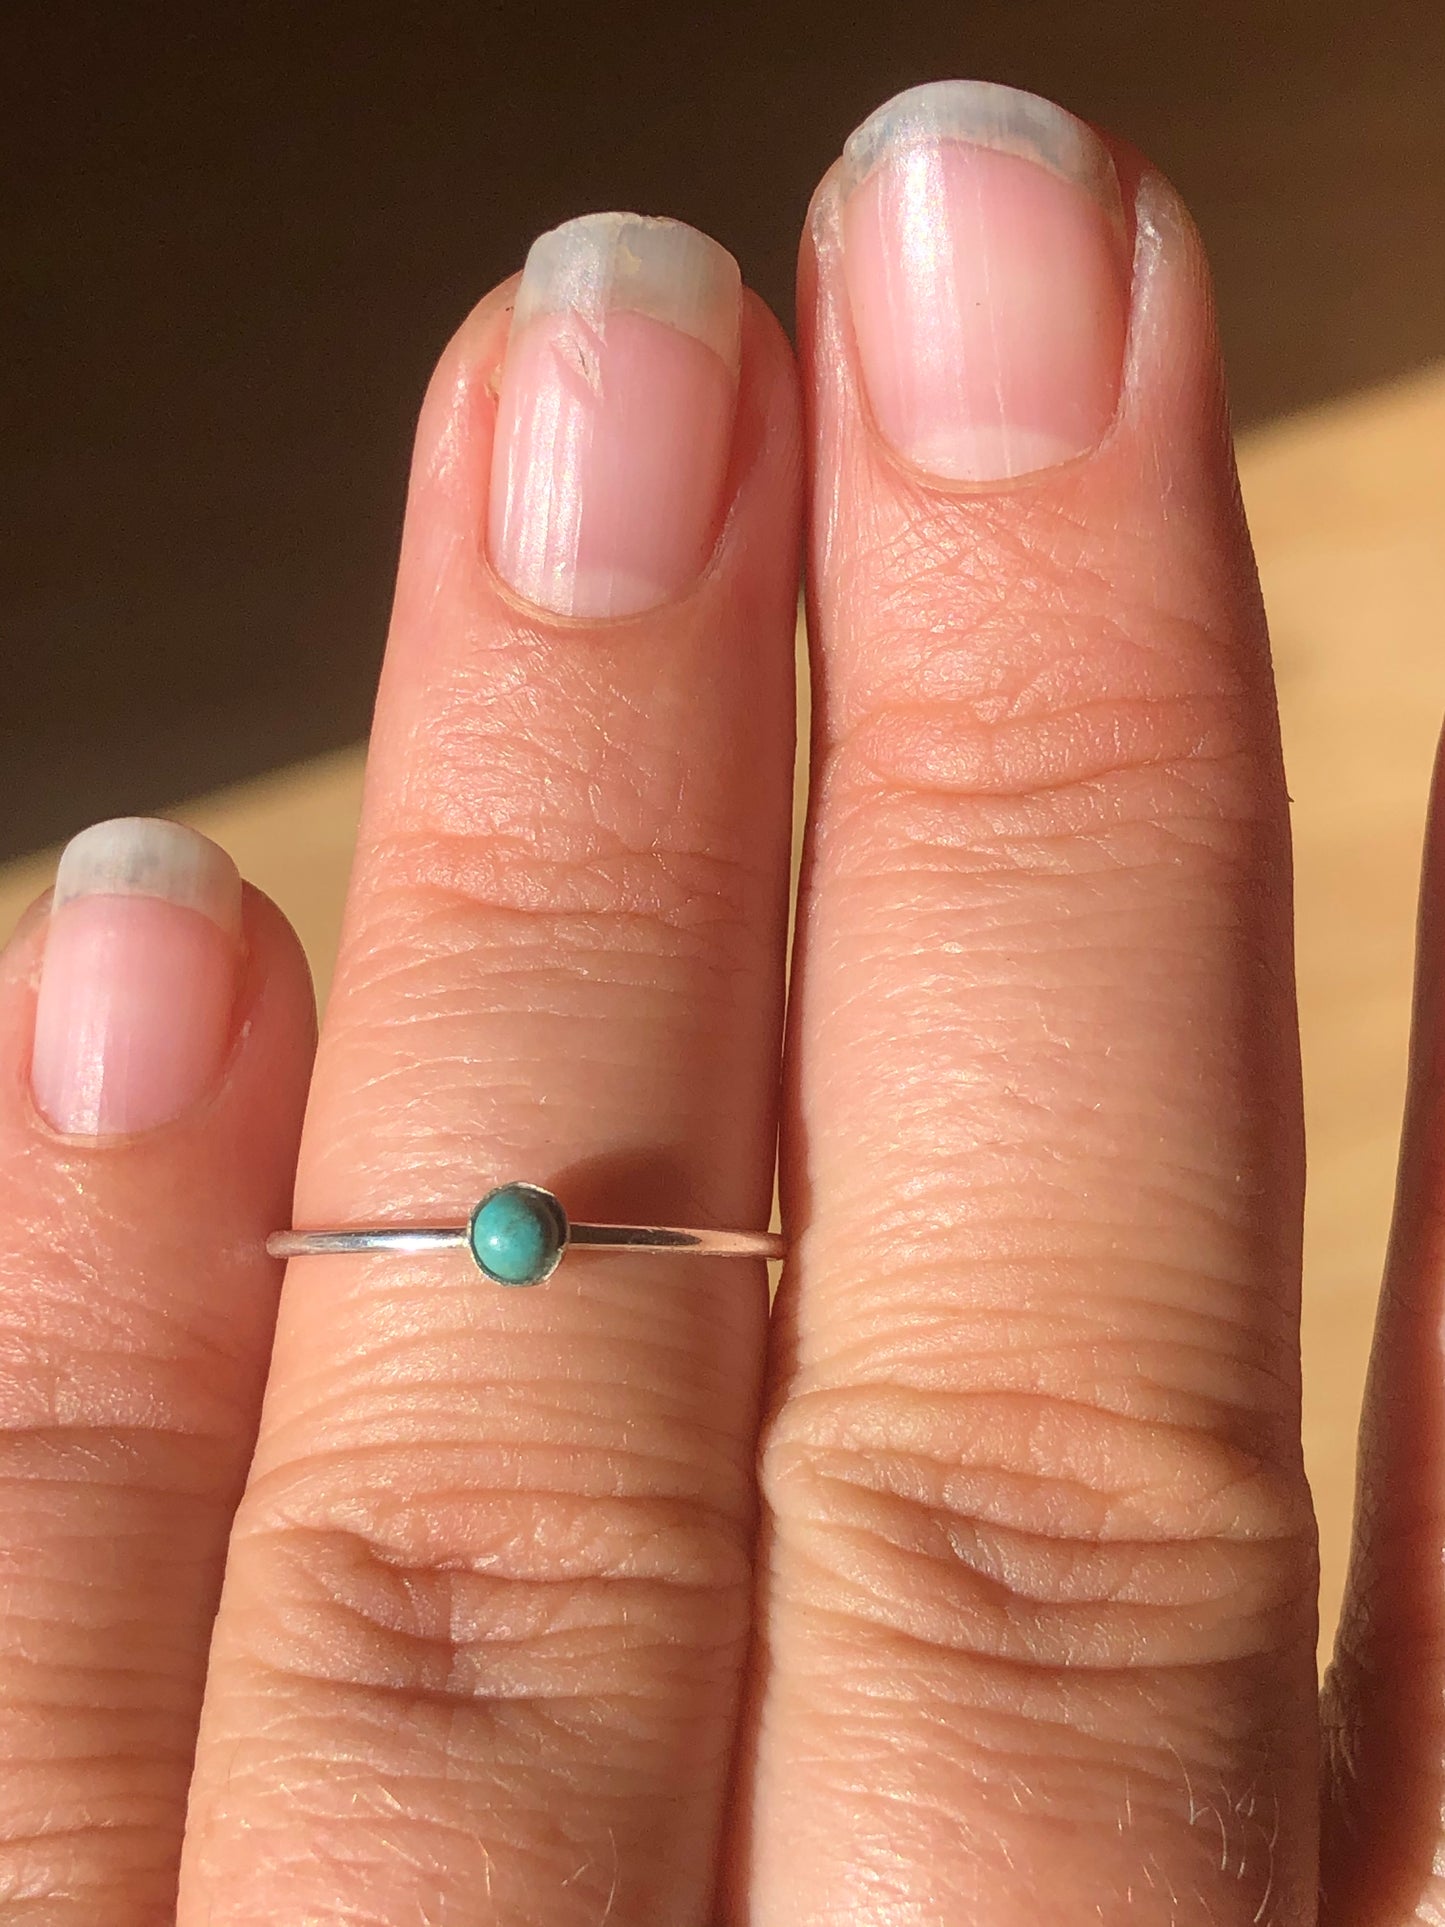 7 & 8US 3mm Minimalist Turquoise Sterling Silver Ring